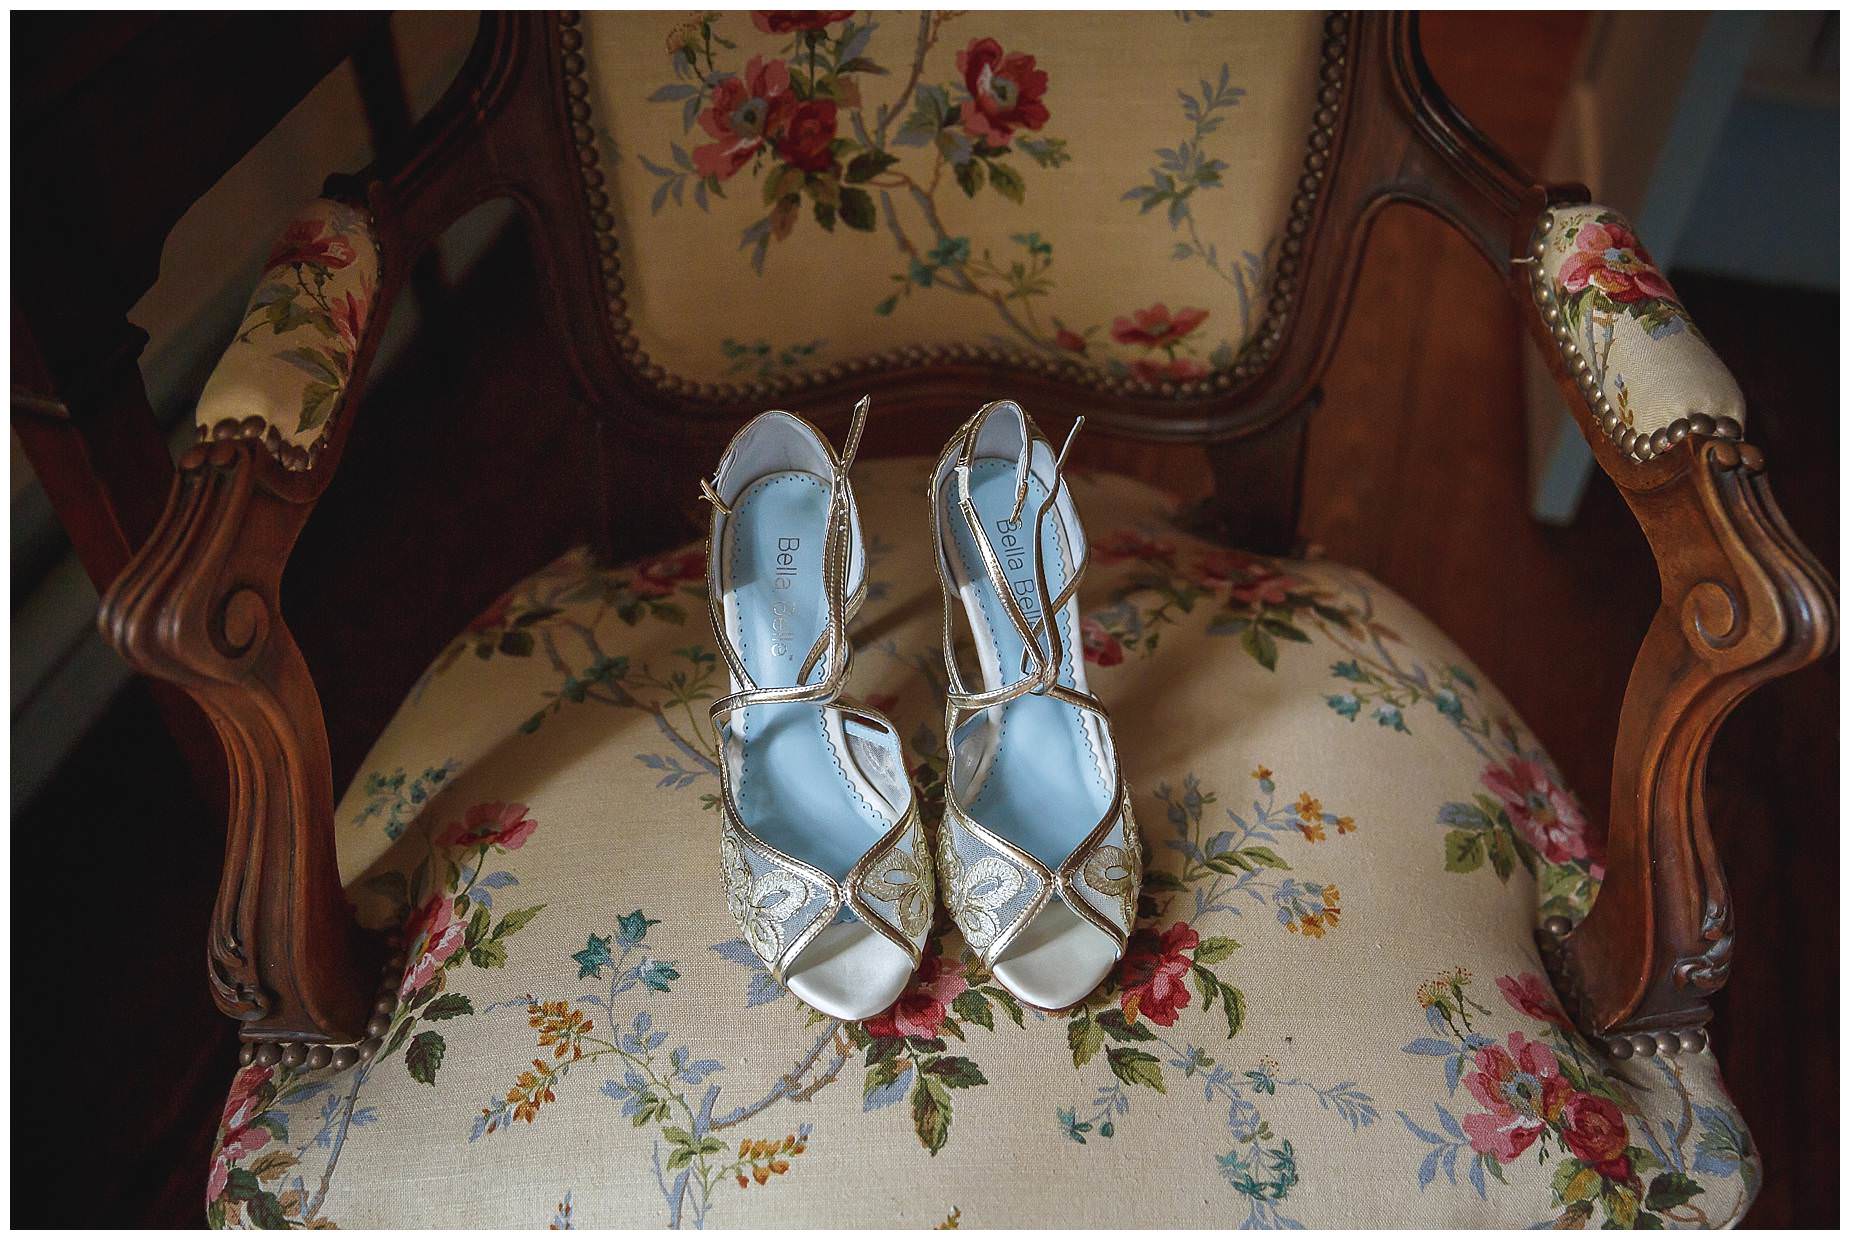 brides shoes on a chair